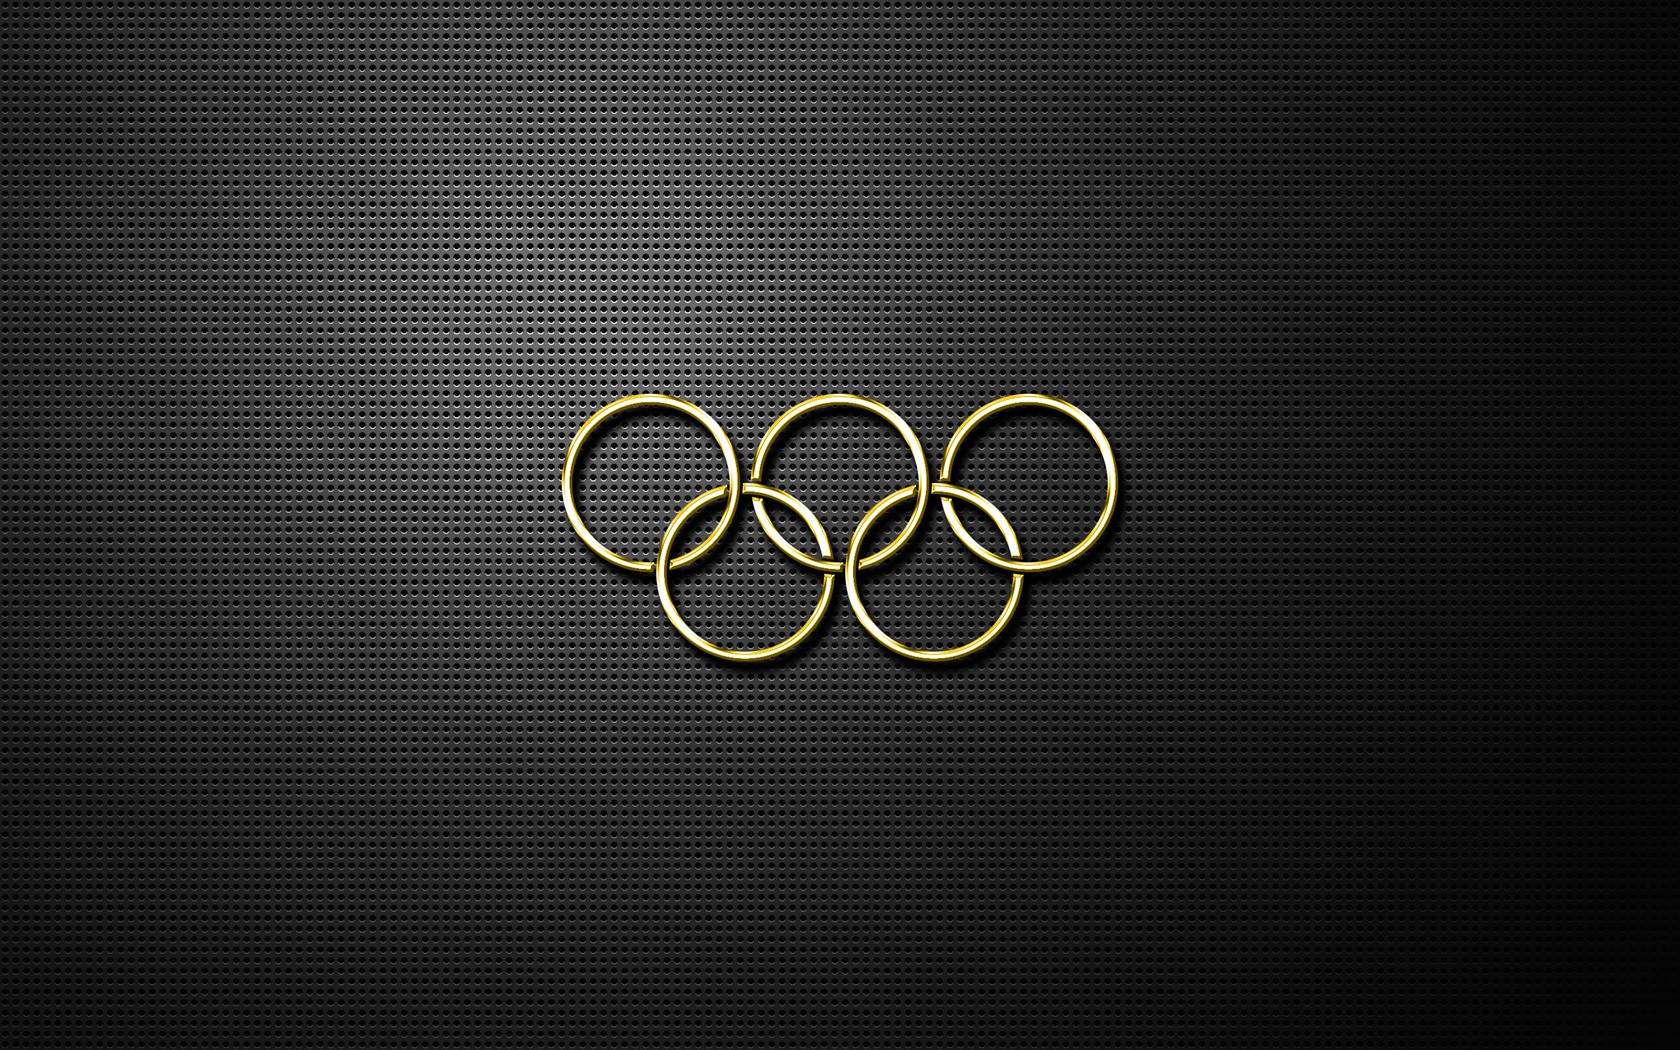 Olympics Simple Background Texture Gold 1680x1050